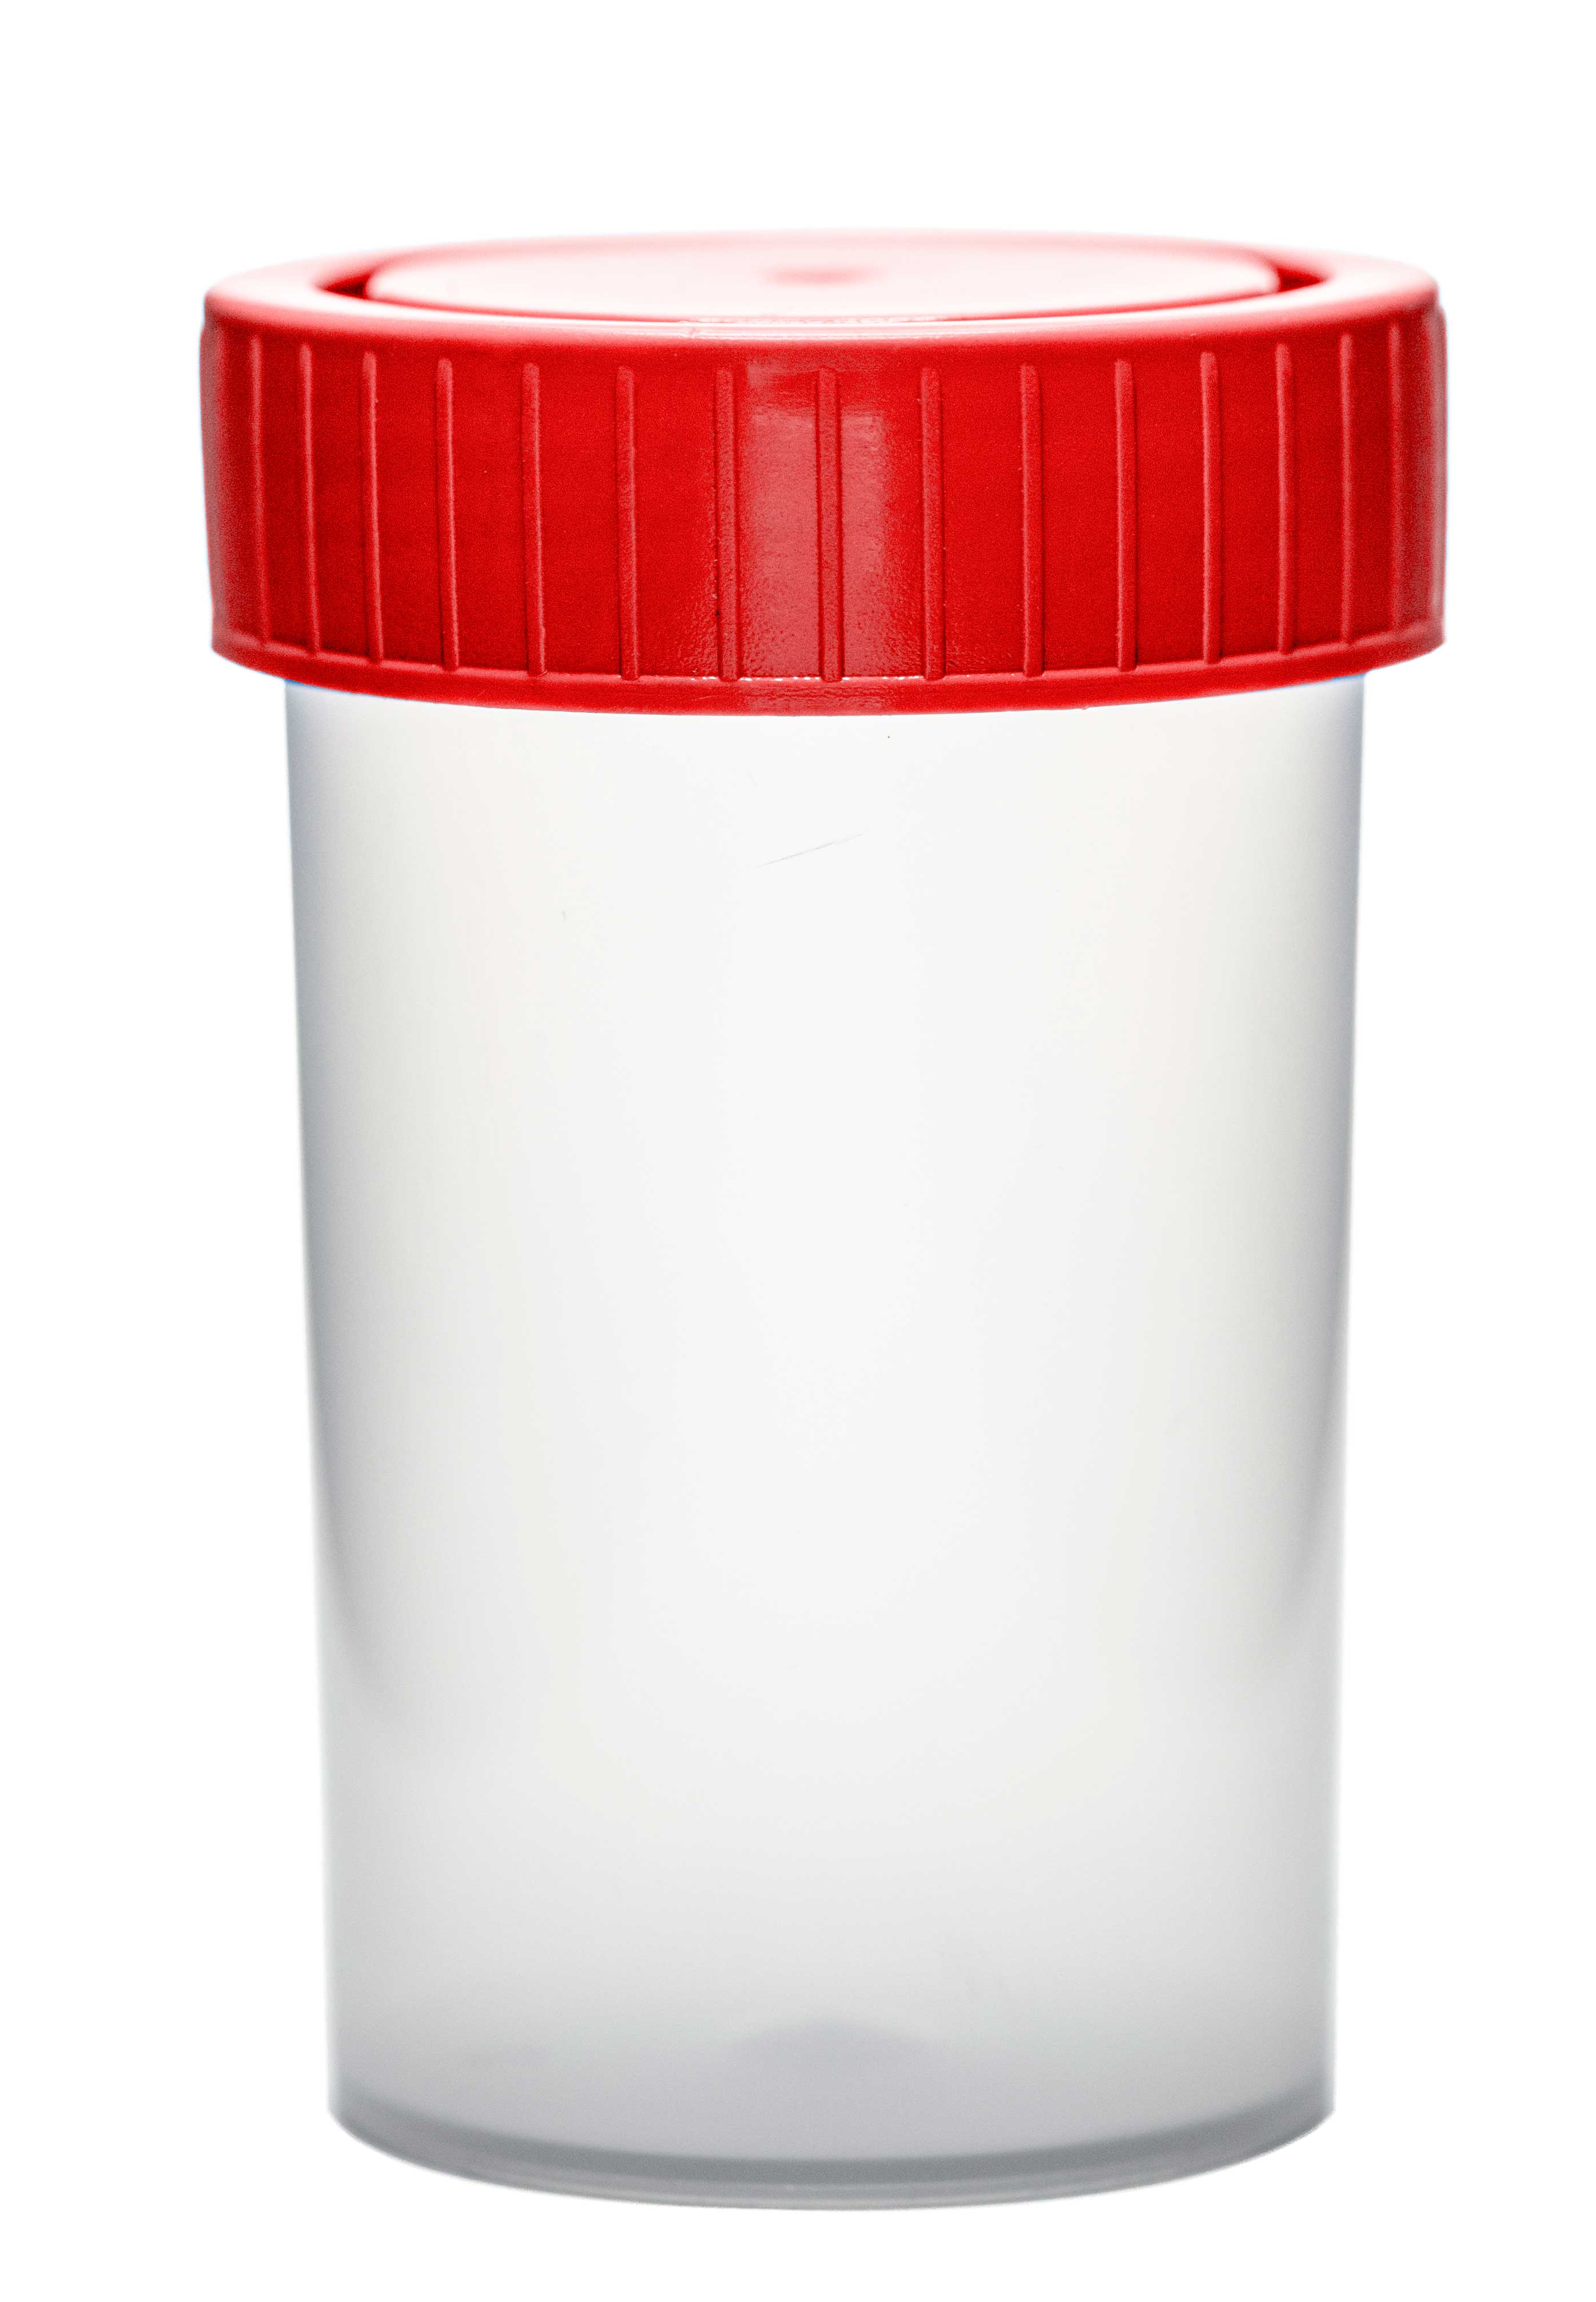 Specimen container made of PP. Vol: 60 ml. Sterile. Ind. wrapped. Cap color: red. Dim: 38 x 65 mm.